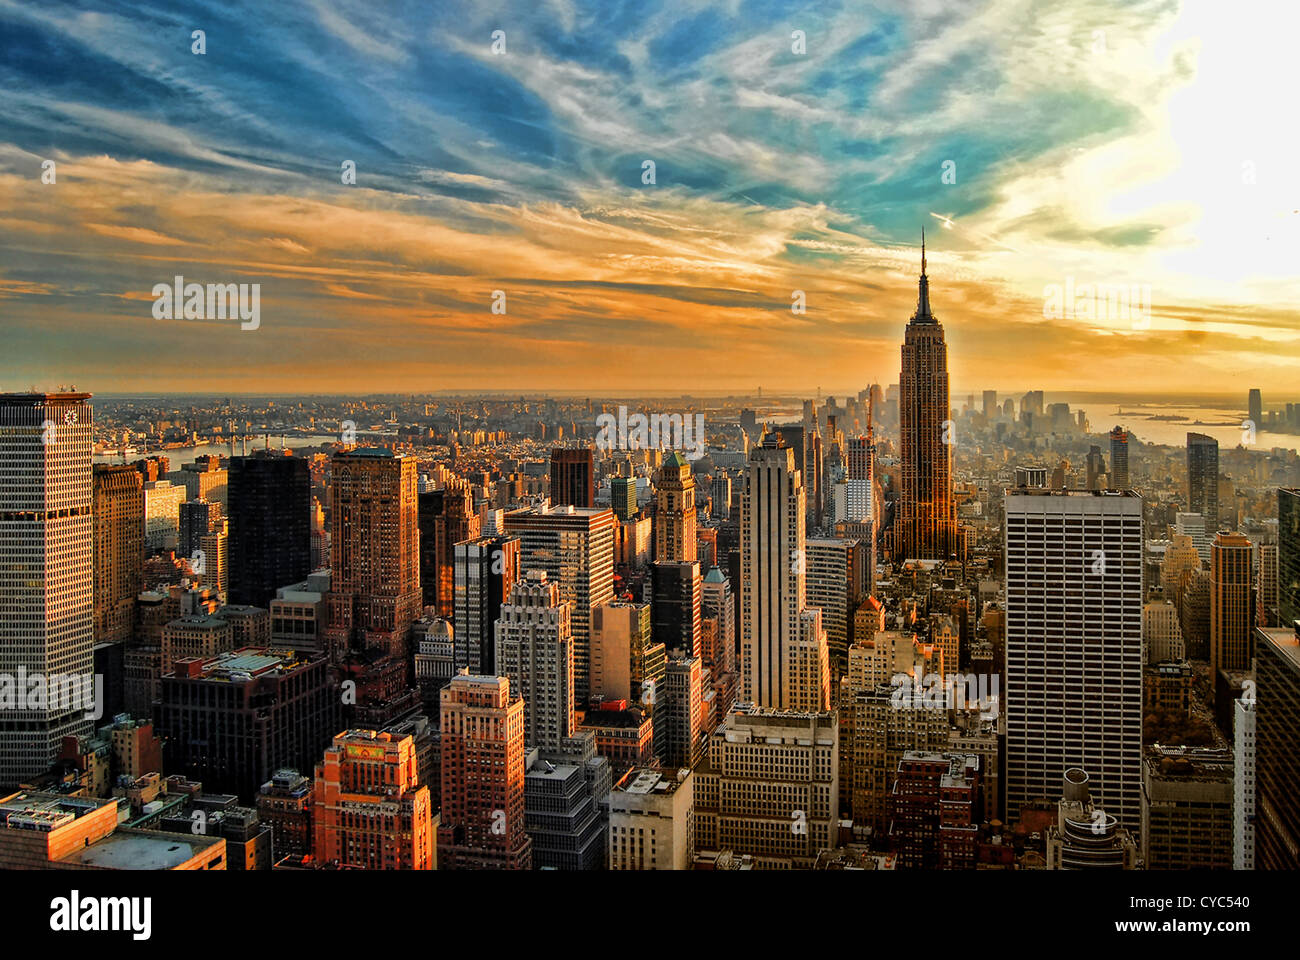 HDR image overlooking southern half of Manhattan, New York City, with Empire State Building. Stock Photo